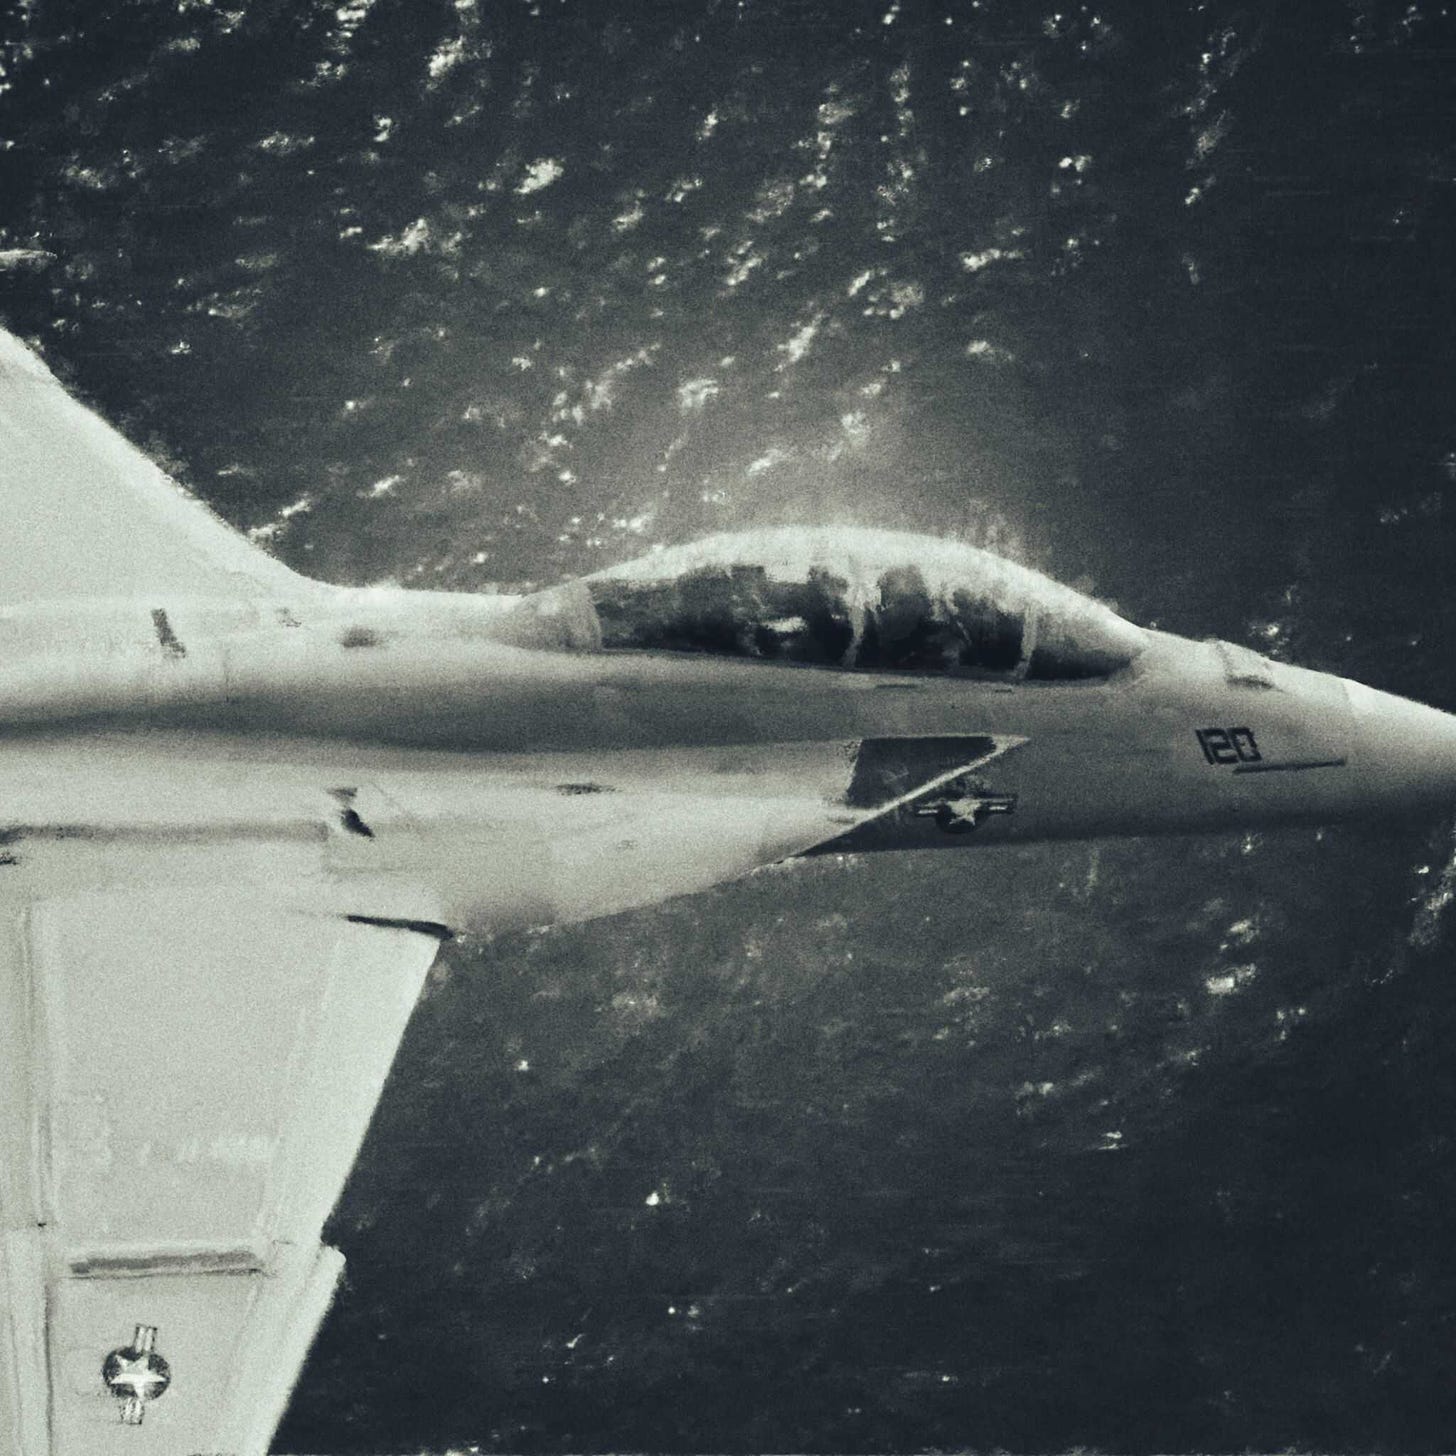 Looking down at an F/A-18